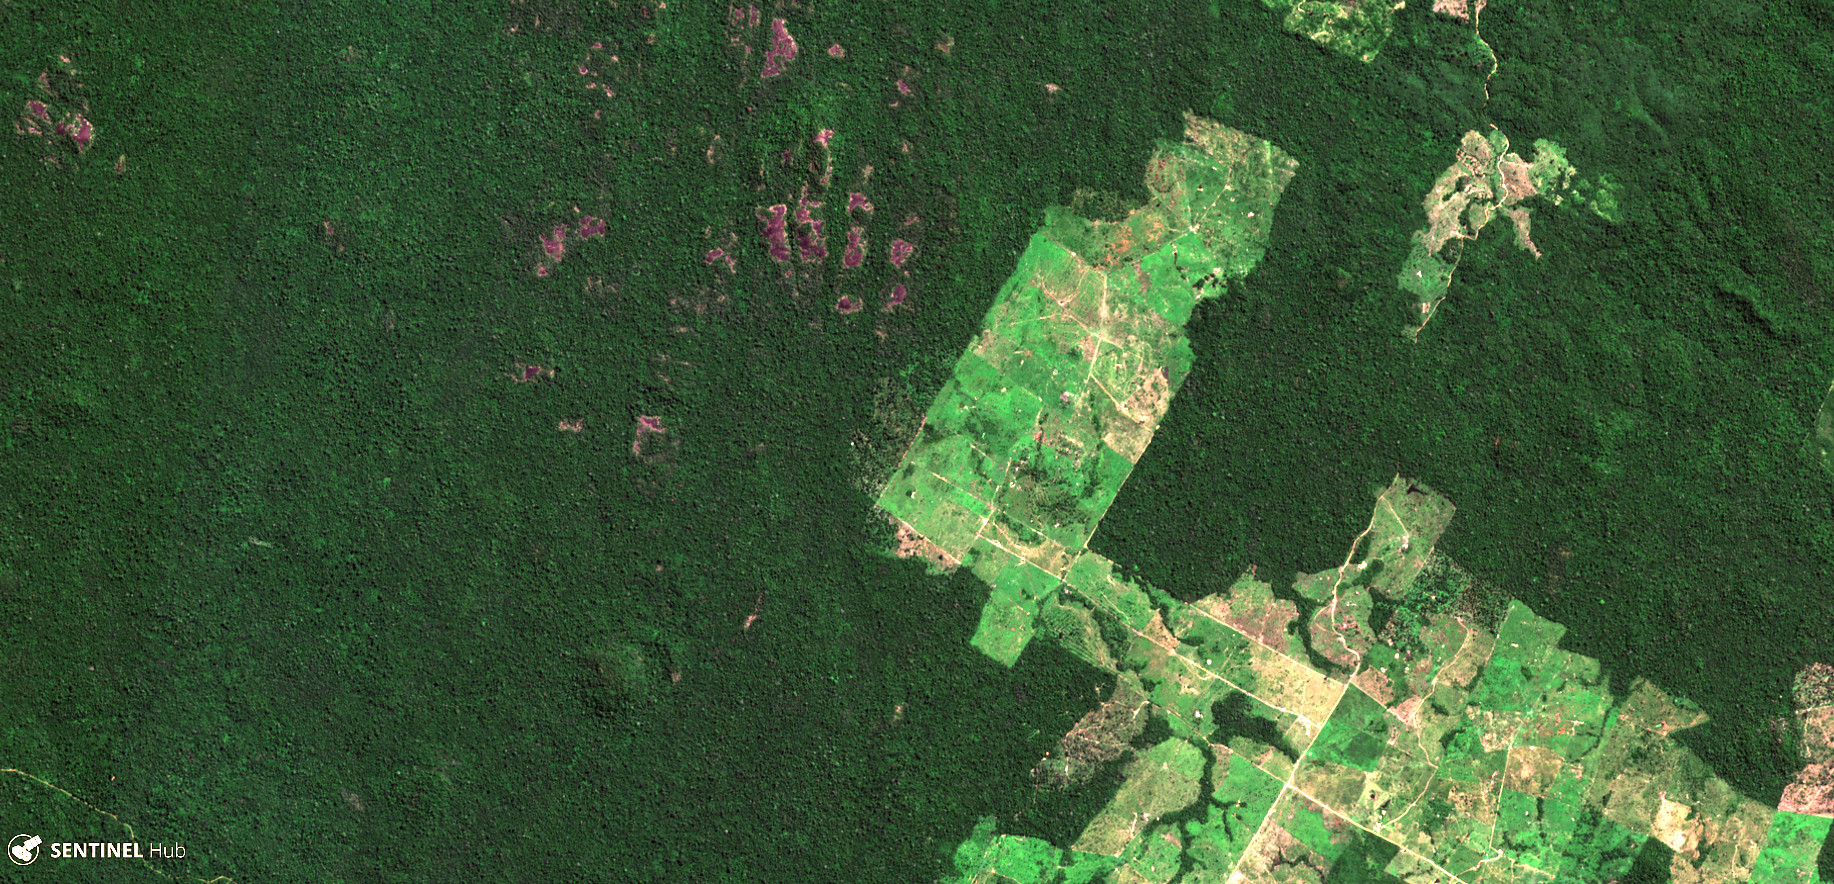 Aerial view of Amazon rainforest with chunks cut down and shown a brown or green, used for raising cattle.